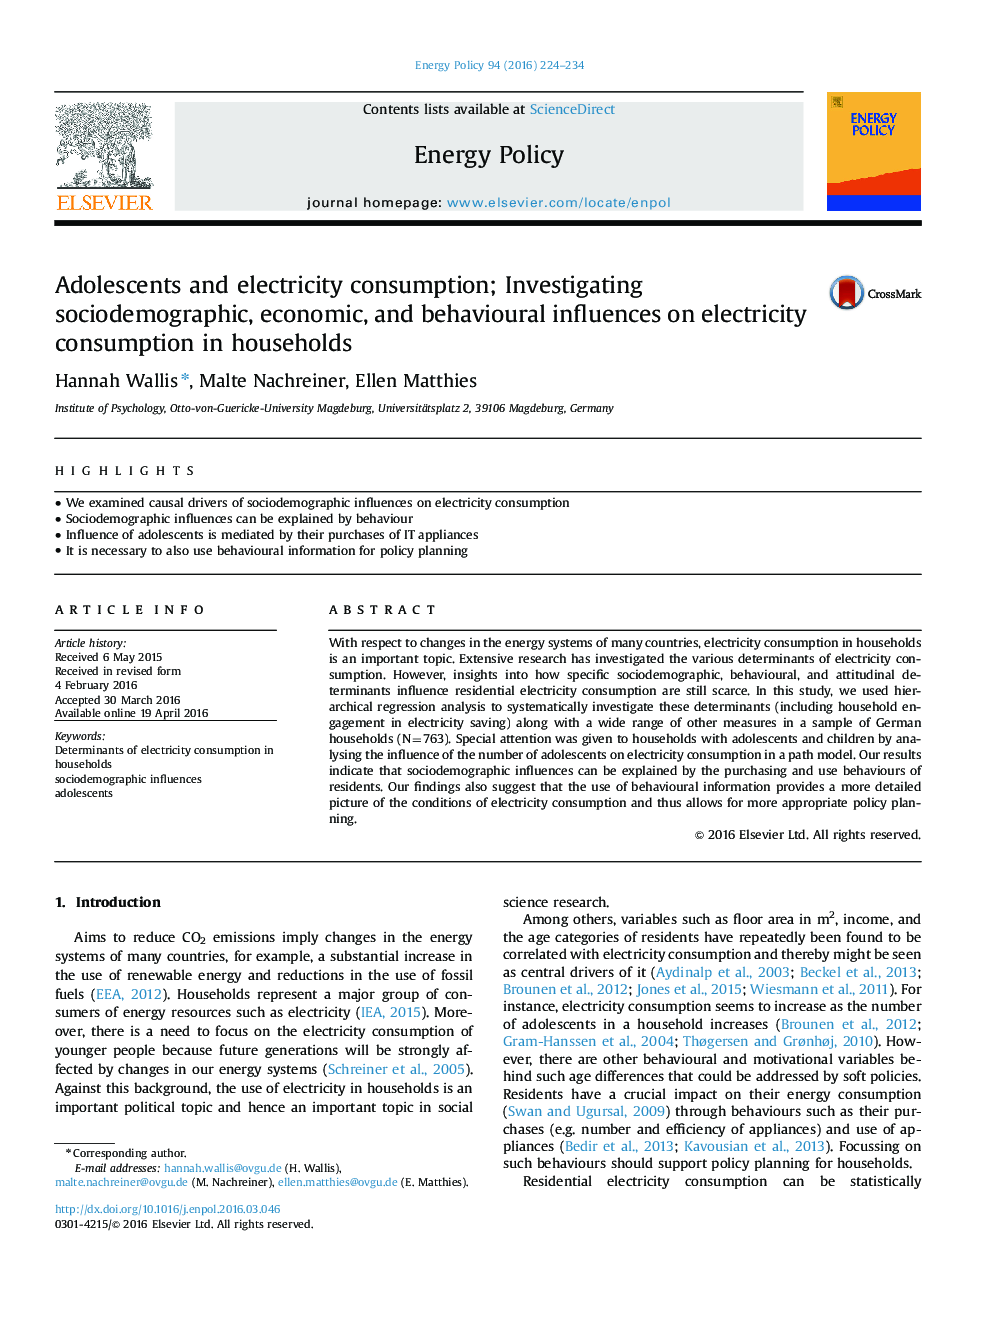 Adolescents and electricity consumption; Investigating sociodemographic, economic, and behavioural influences on electricity consumption in households